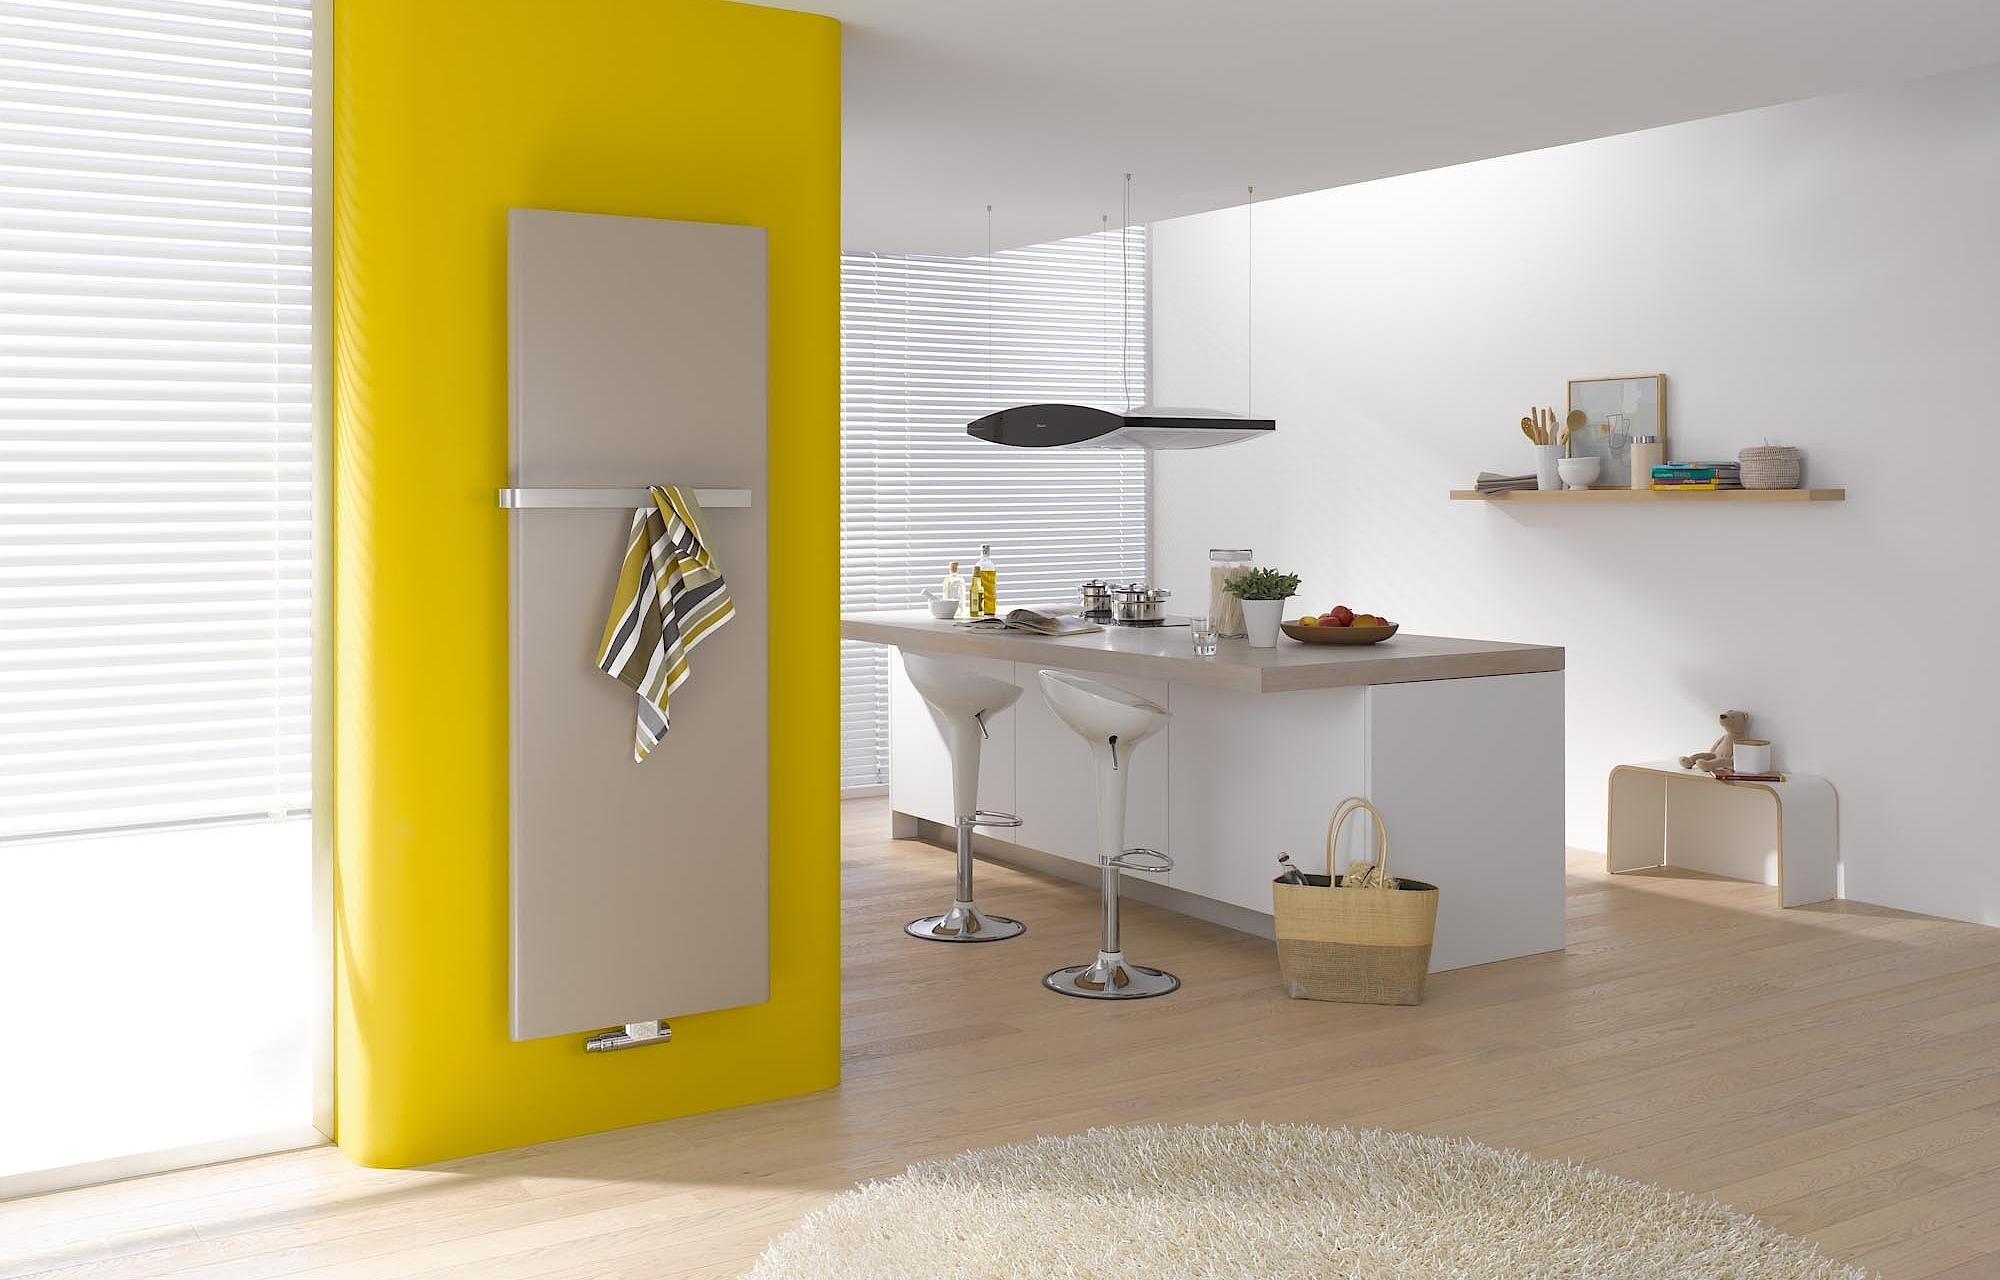 Kermi Pateo design and bathroom radiators with towel rail option for added convenience.